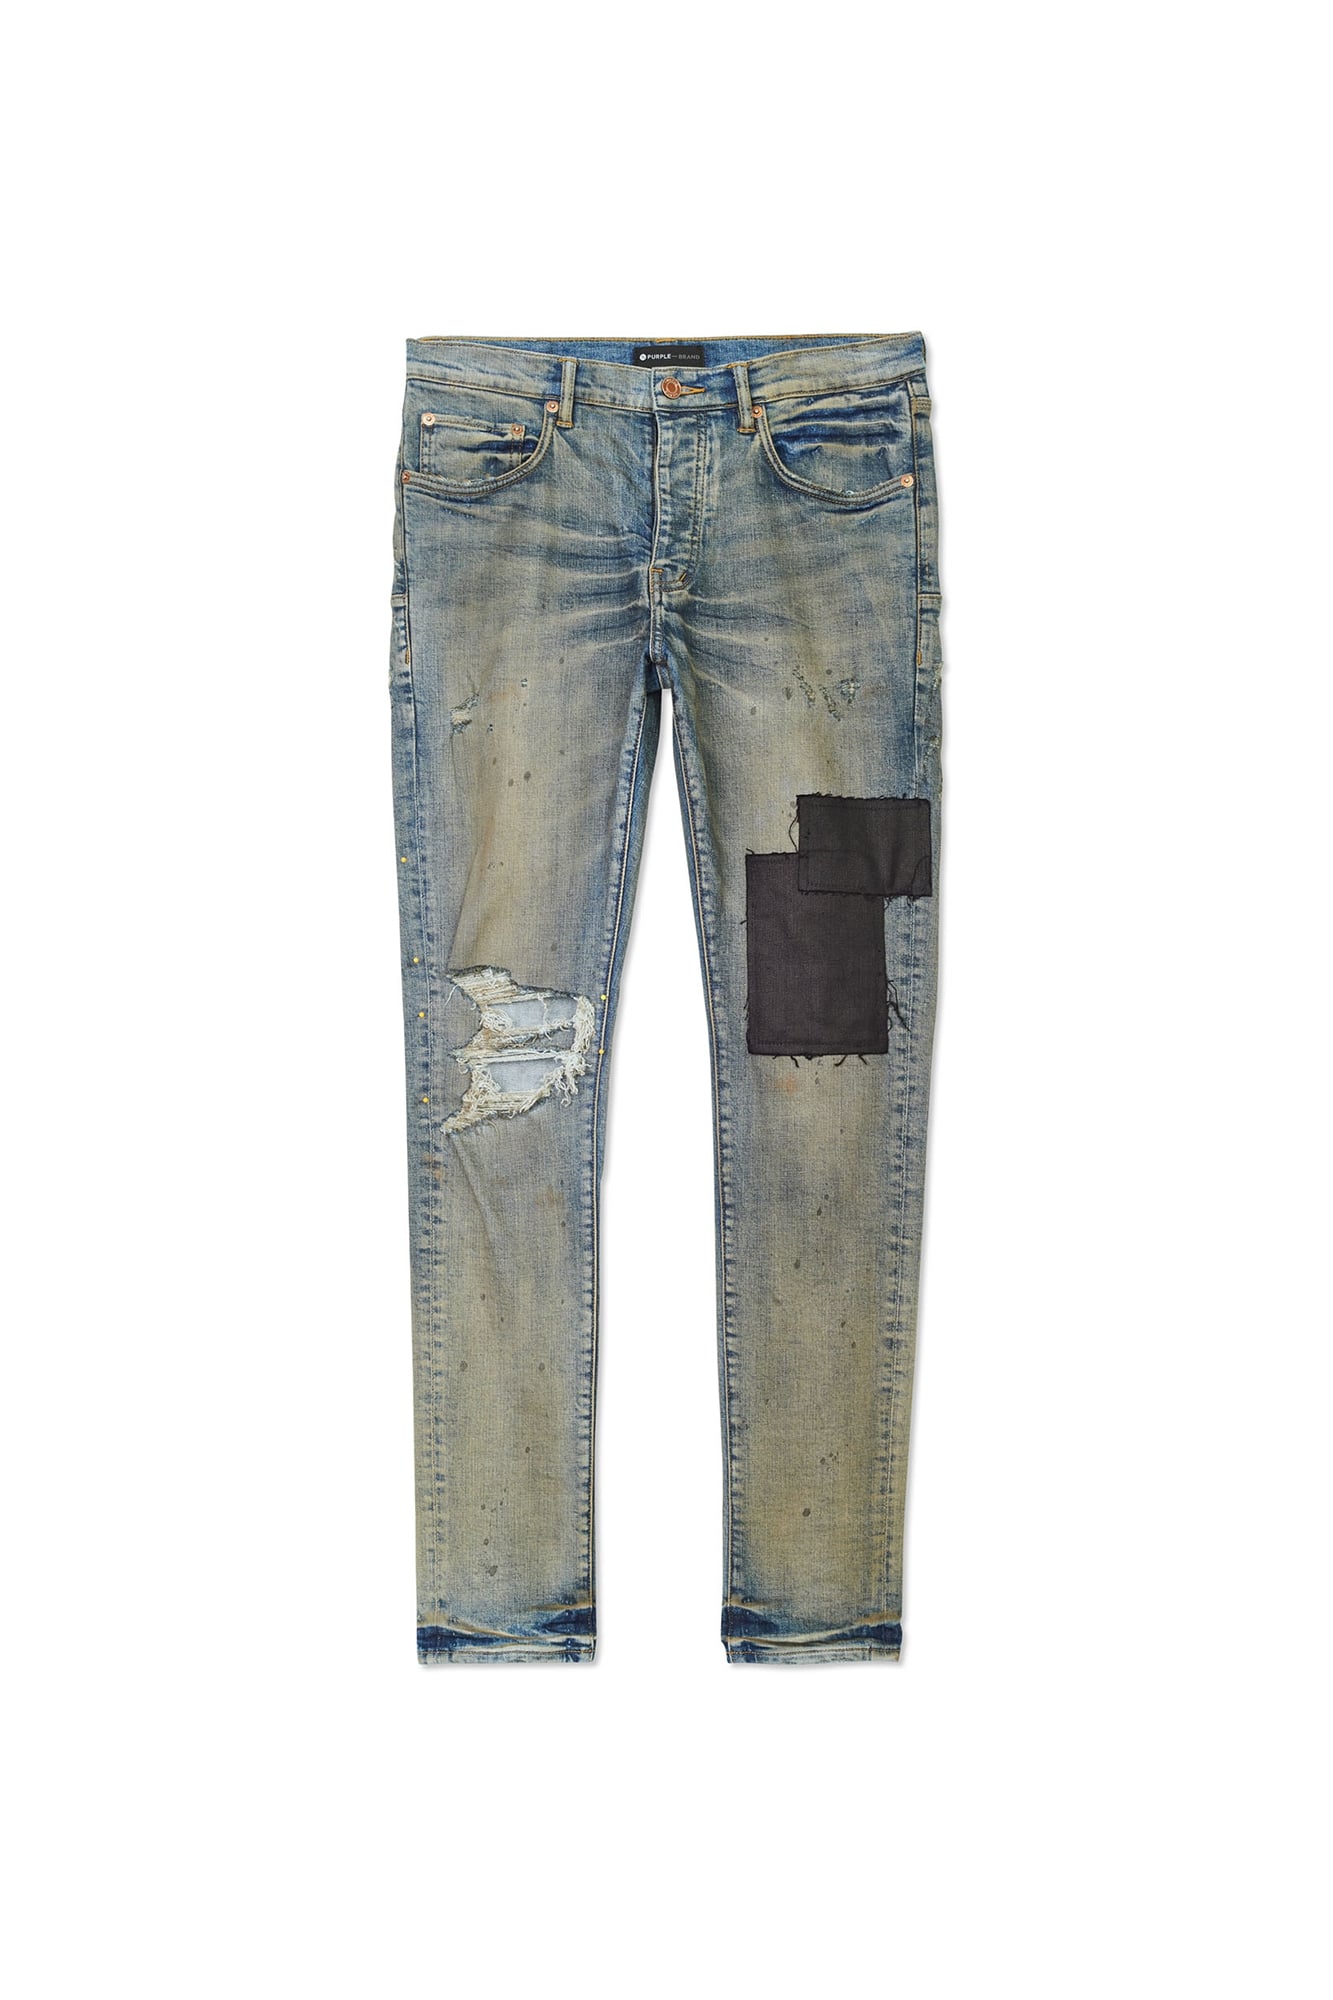 PURPLE BRAND - Men's Denim Jean - Low Rise Skinny - Style No. P001 - Exclusive Indigo Oil Patched - Front